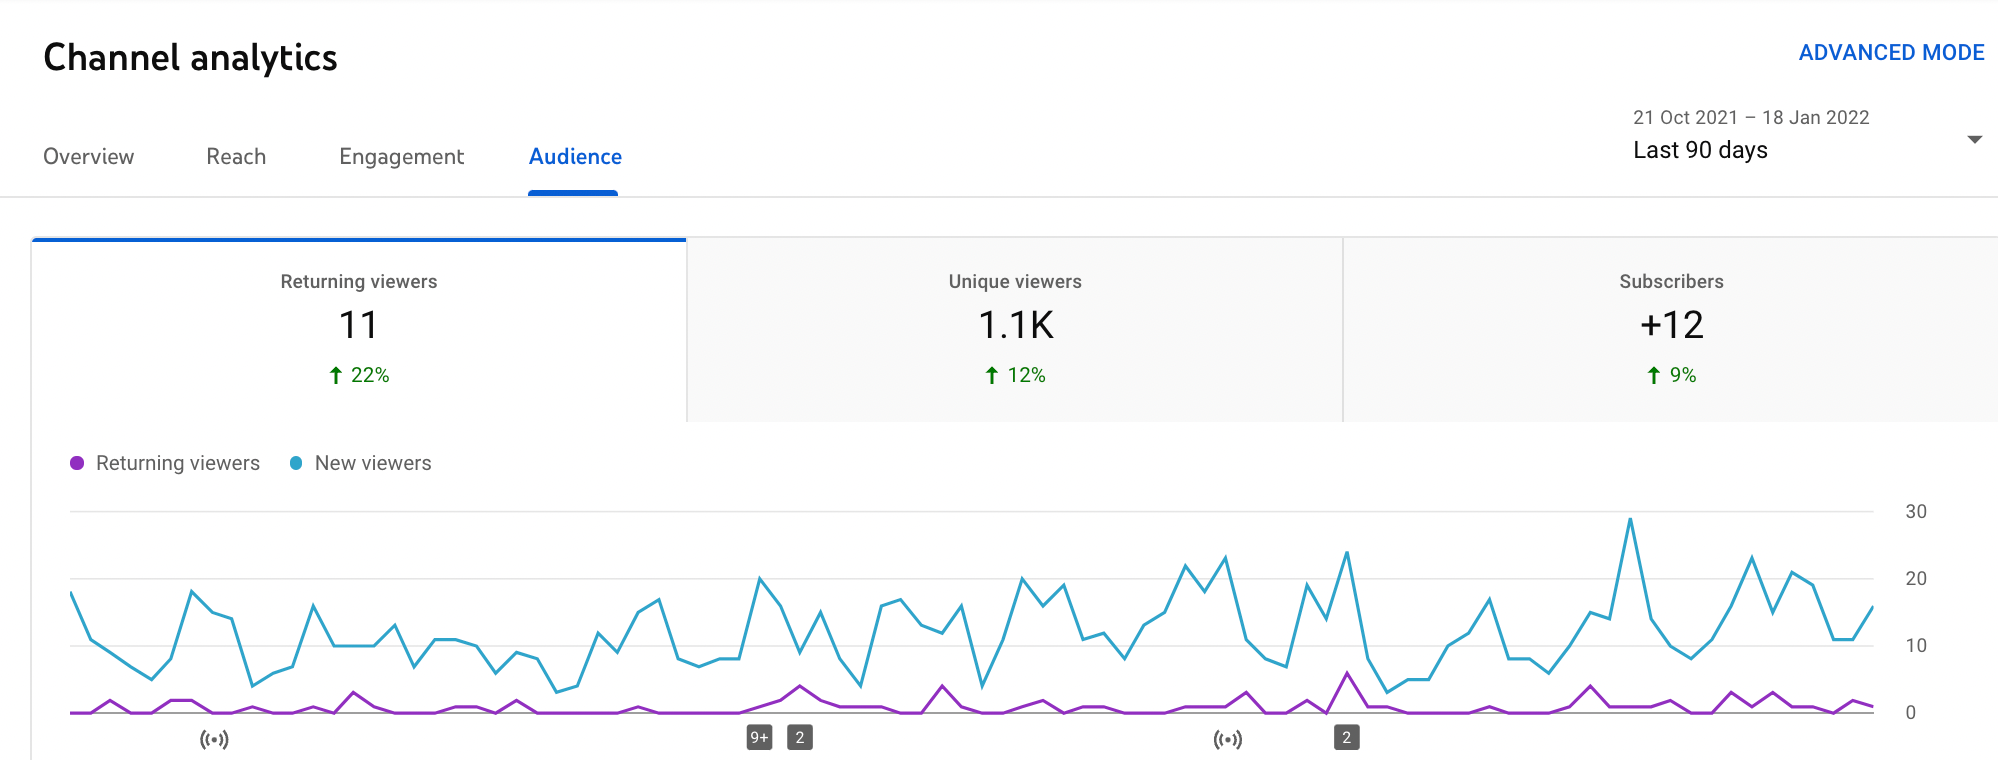 Here you can see what types of KPIs are displayed in the audience section of your native YouTube analytics.